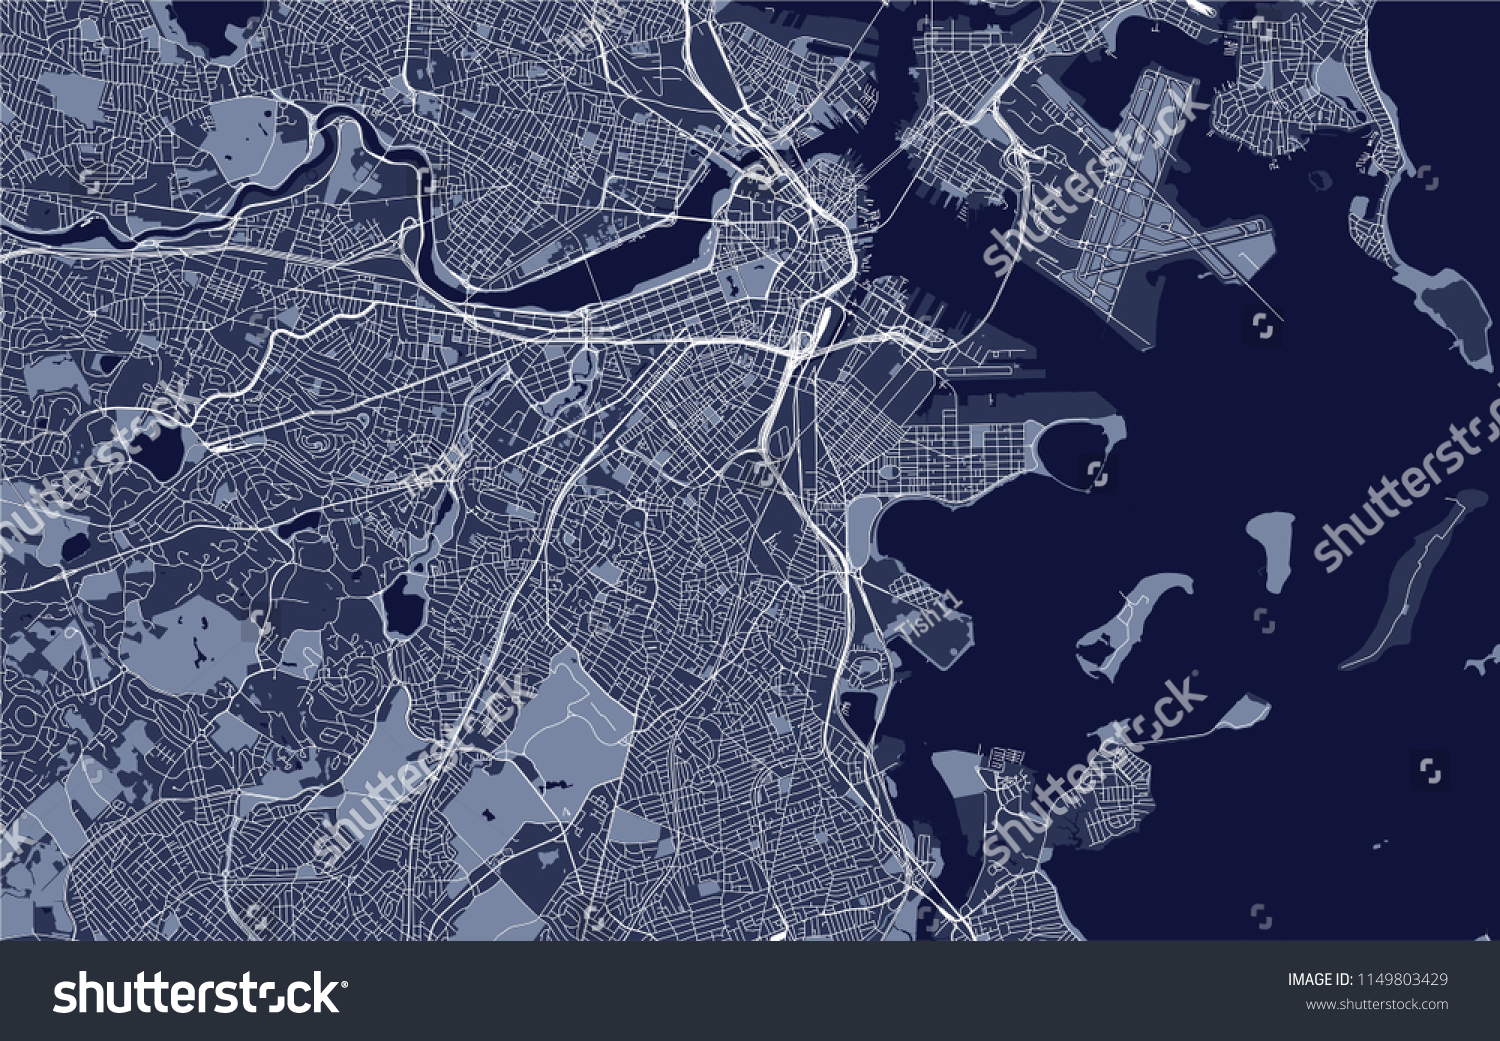 SVG of vector map of the city of Boston, USA svg